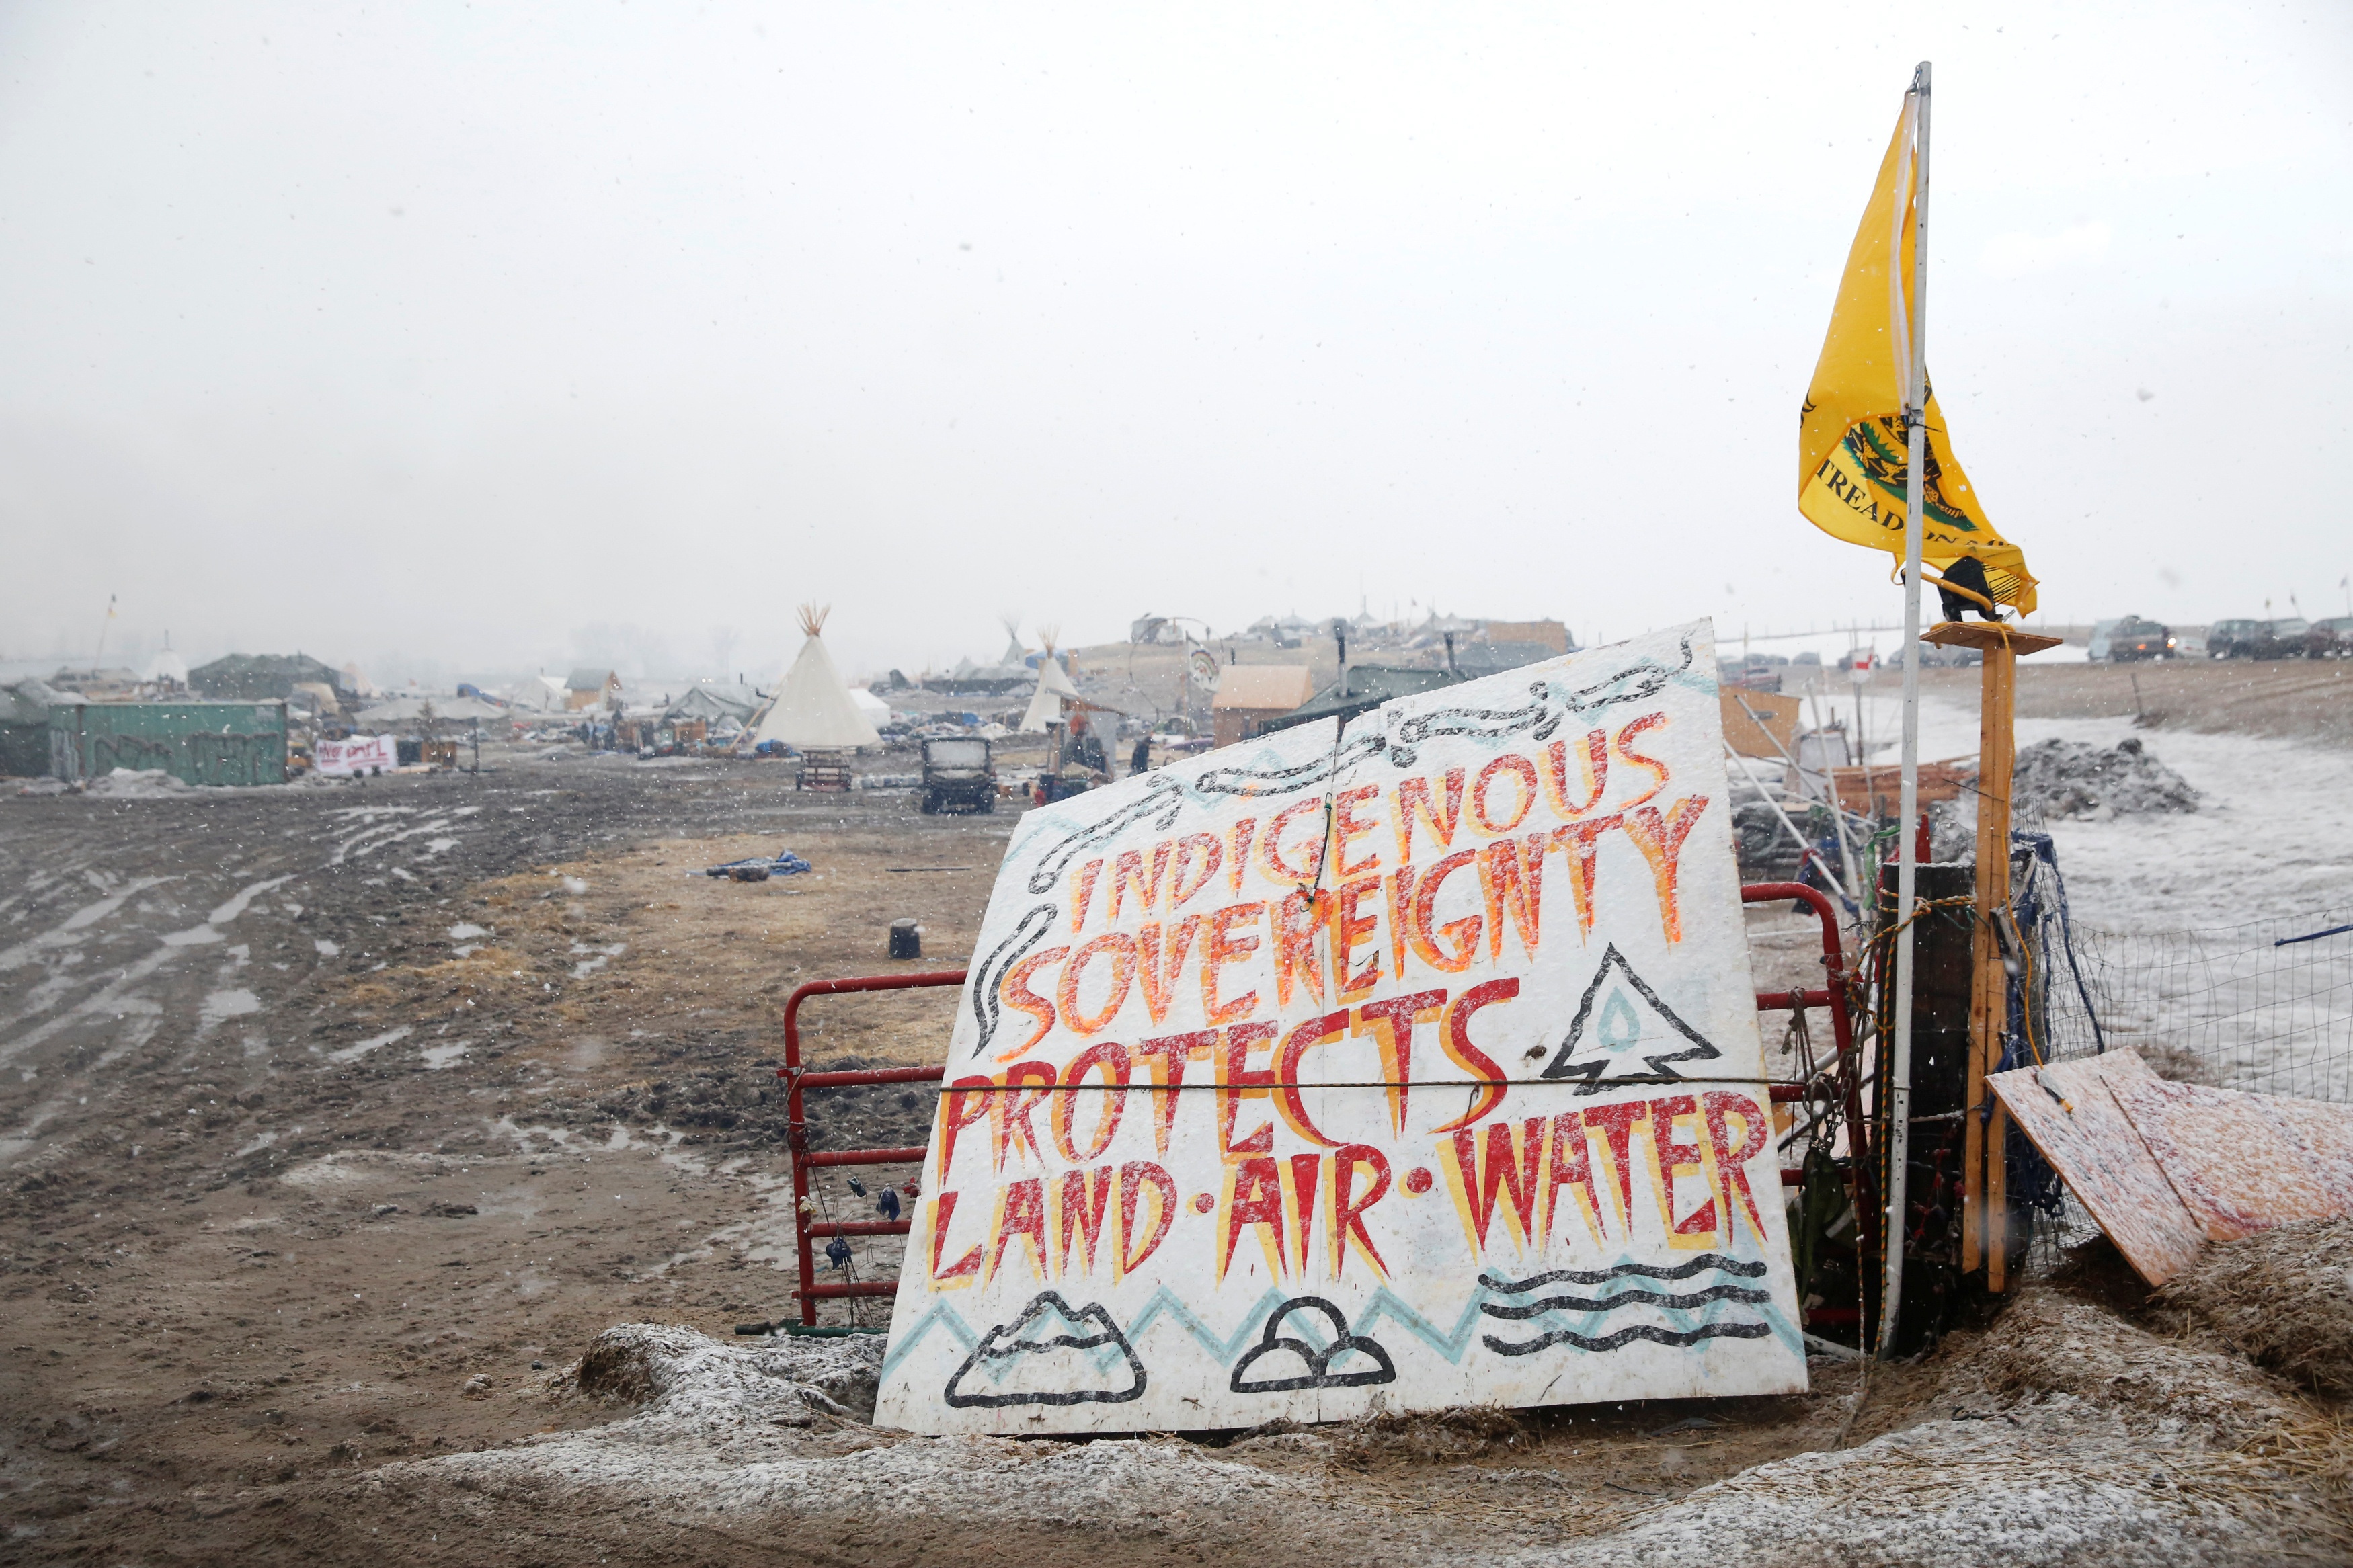 FILE PHOTO: A sign stands in the entrance of the main opposition camp against the Dakota Access oil pipeline near Cannon Ball, North Dakota, U.S., February 22, 2017. REUTERS/Terray Sylvester